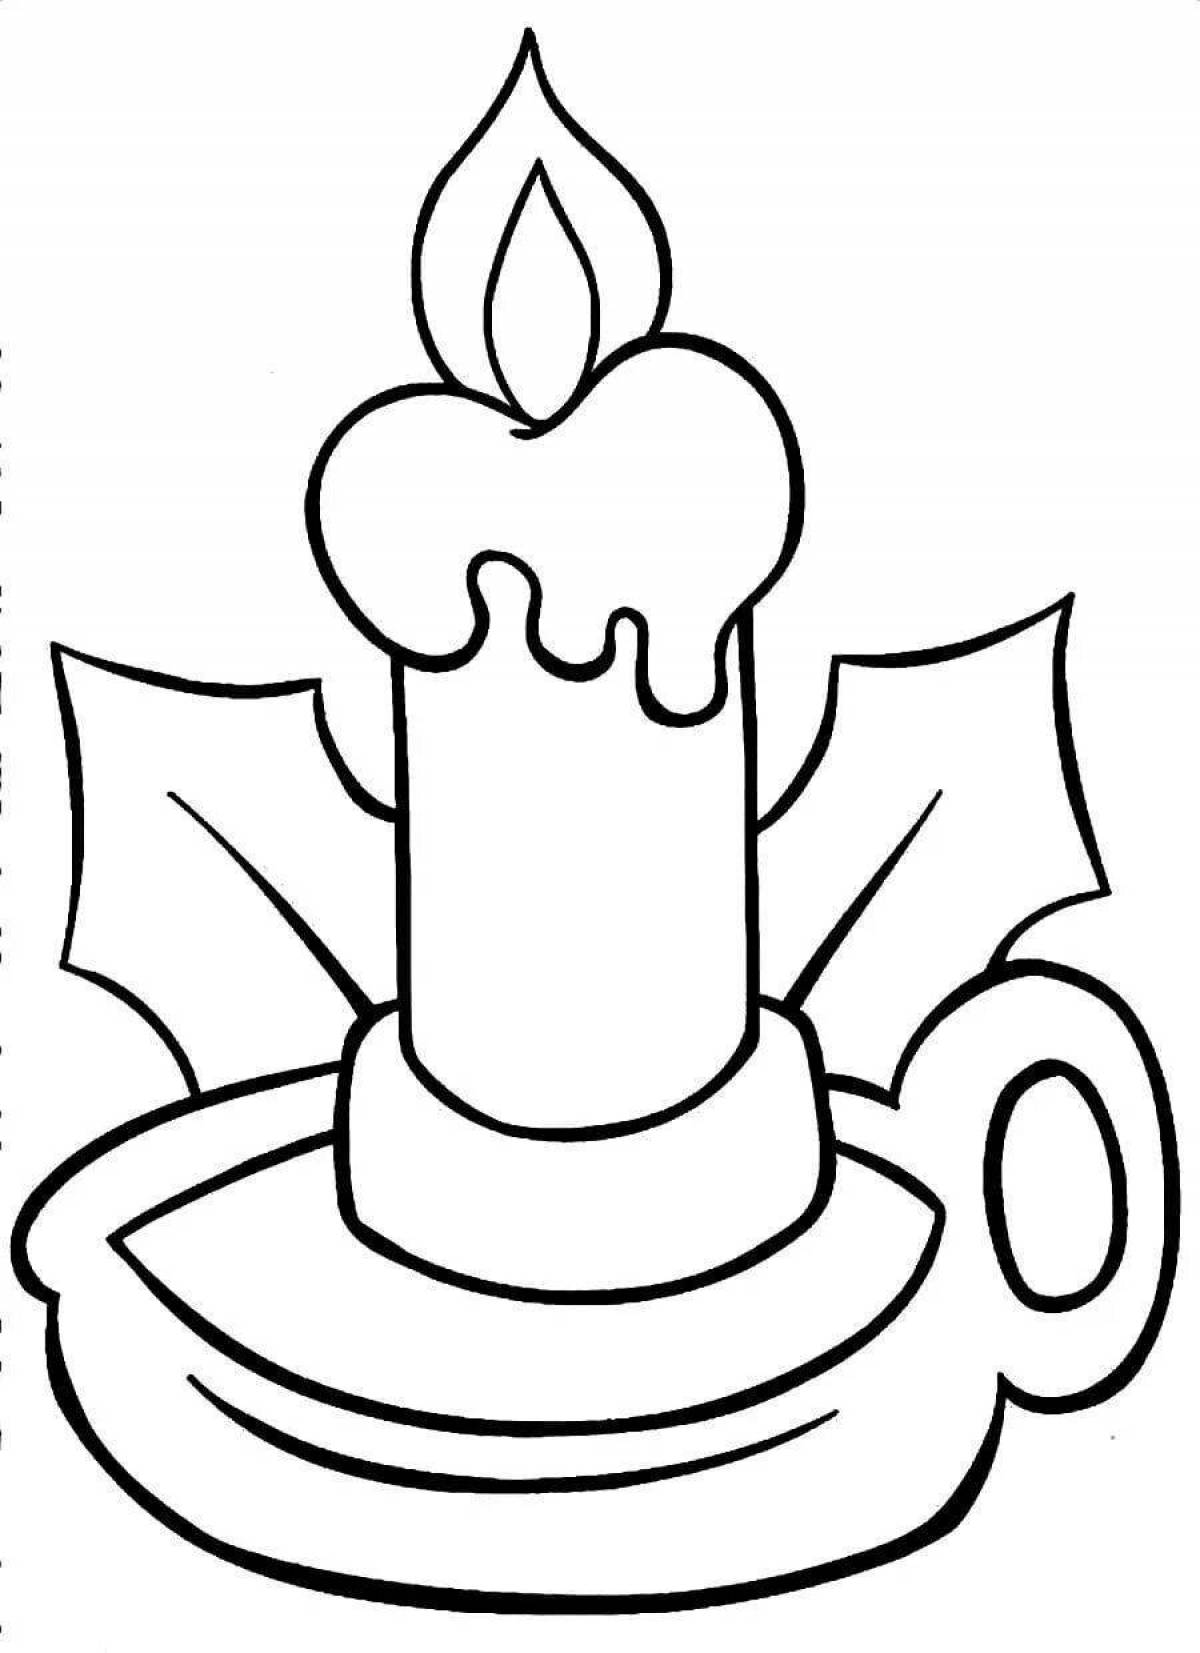 Rampant Christmas candle coloring page